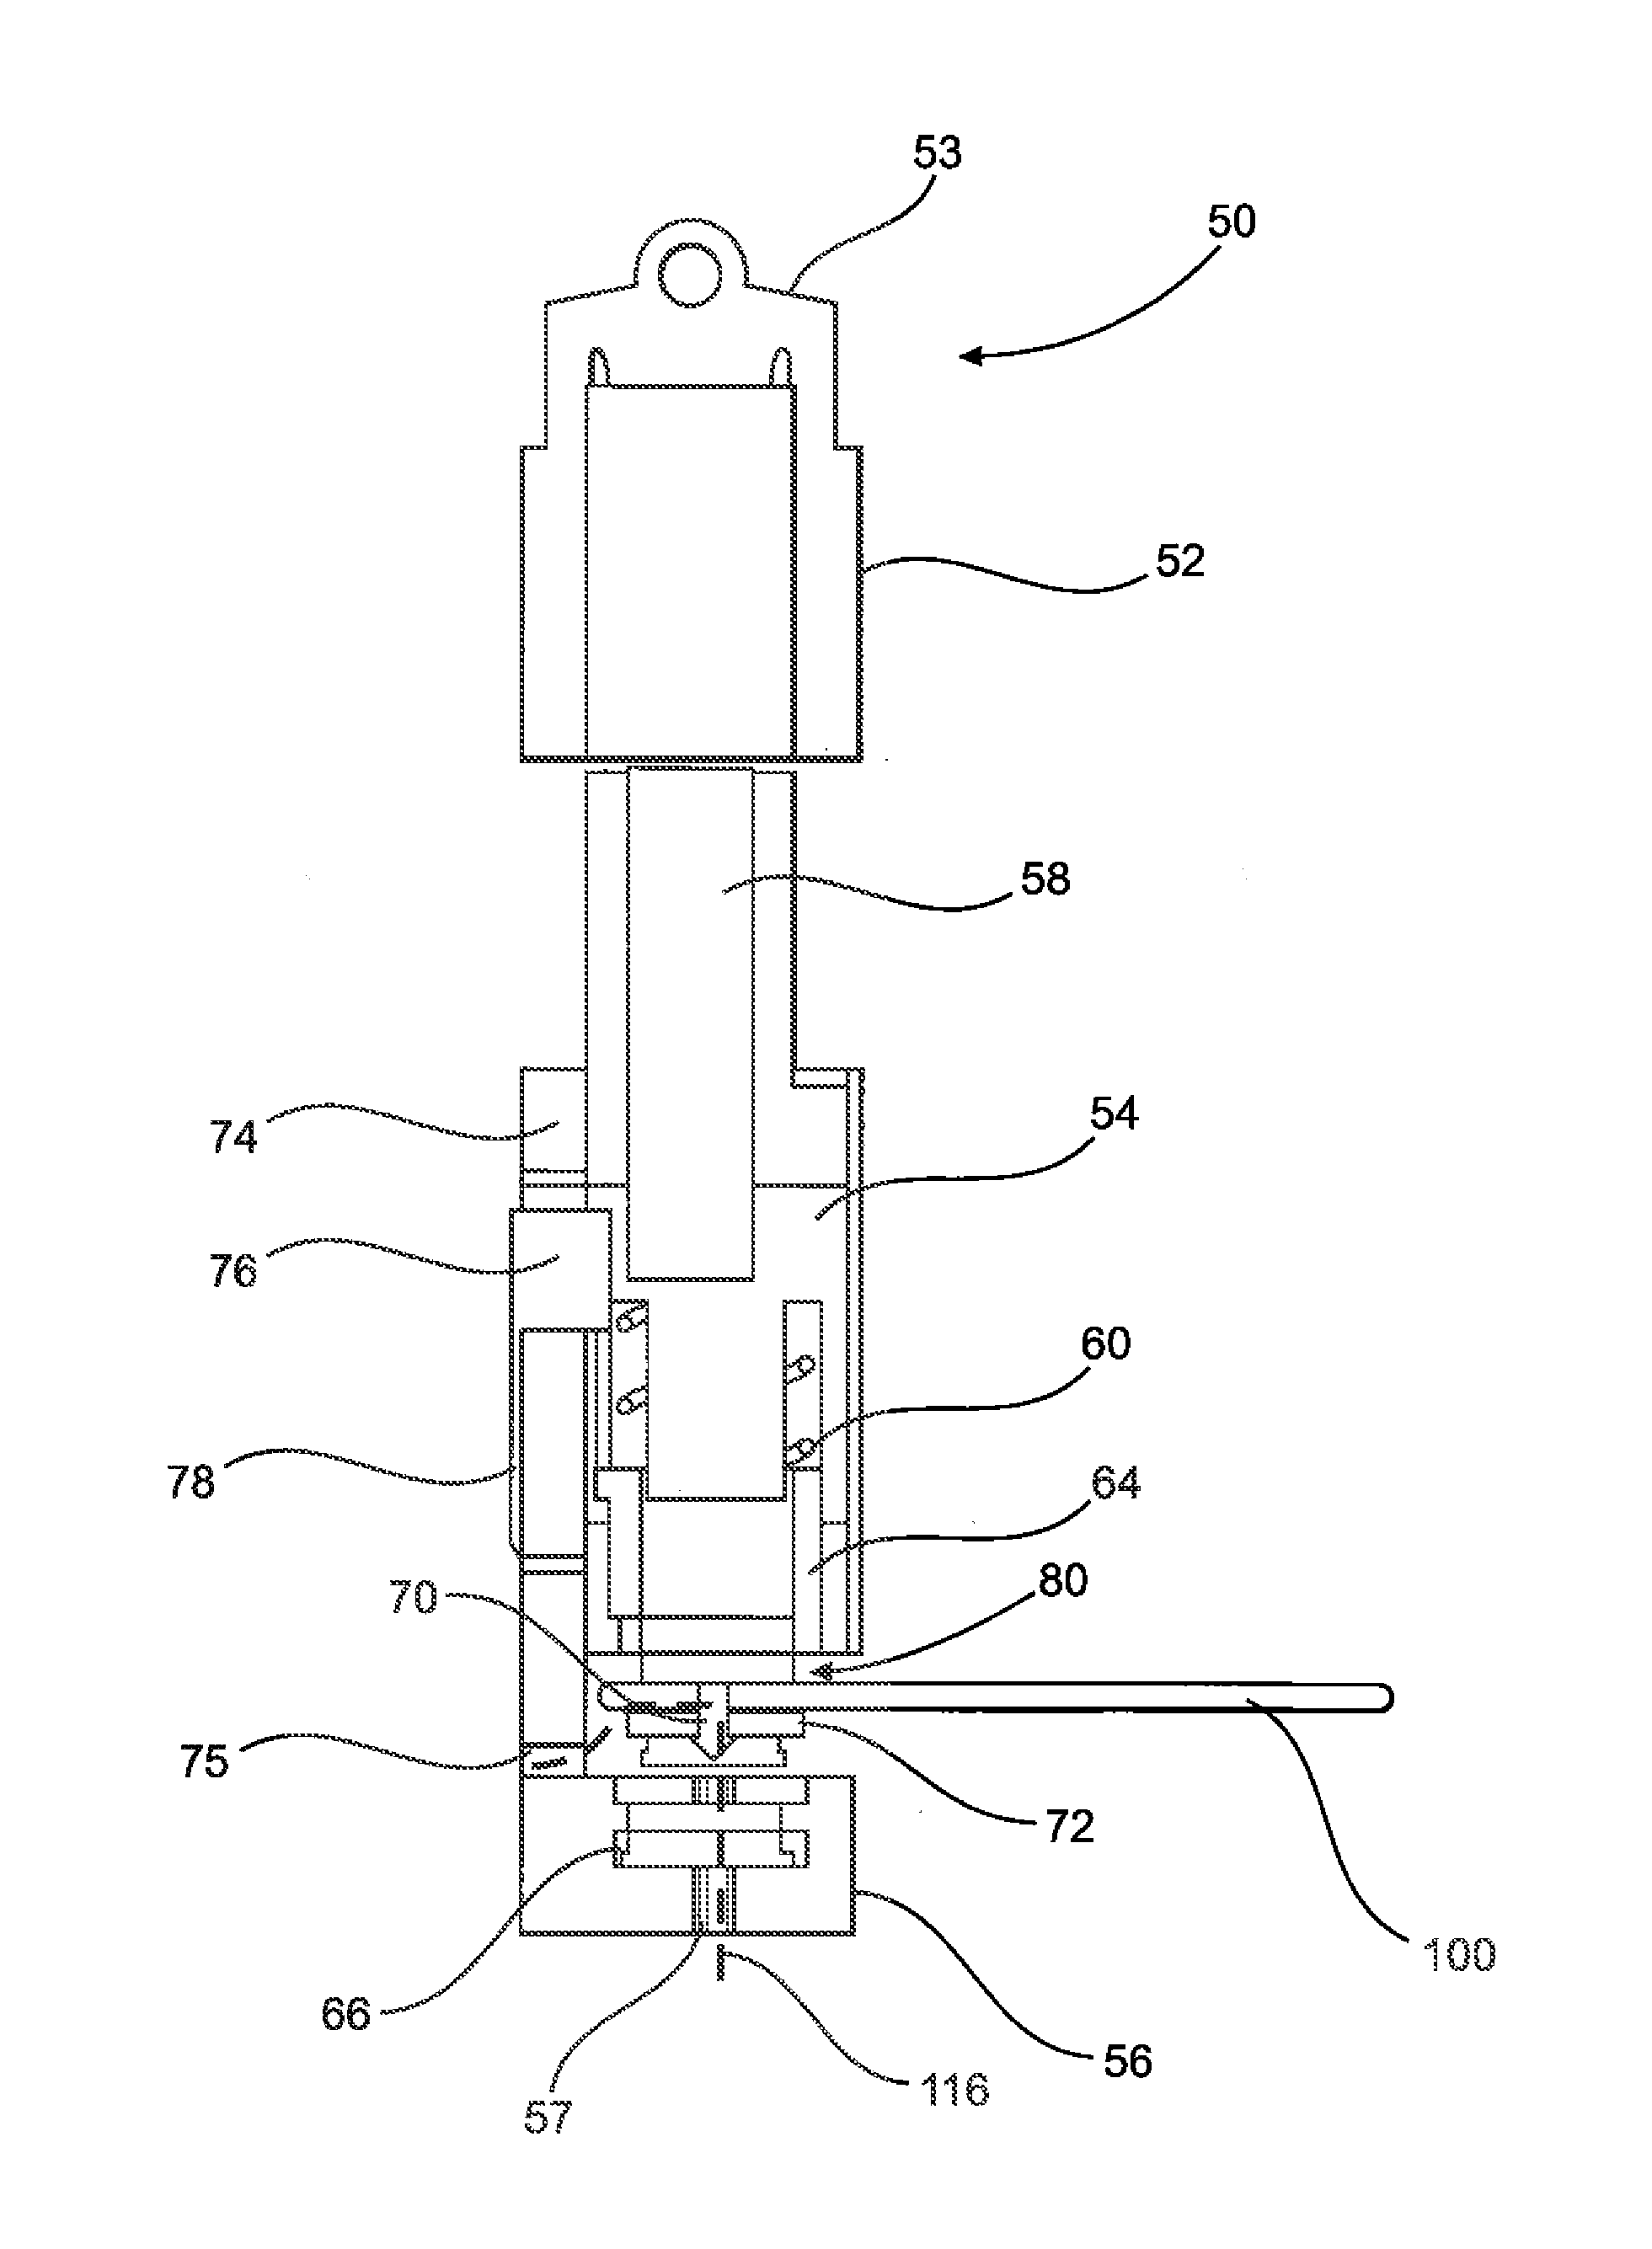 Device and method of treating heart valve malfunction